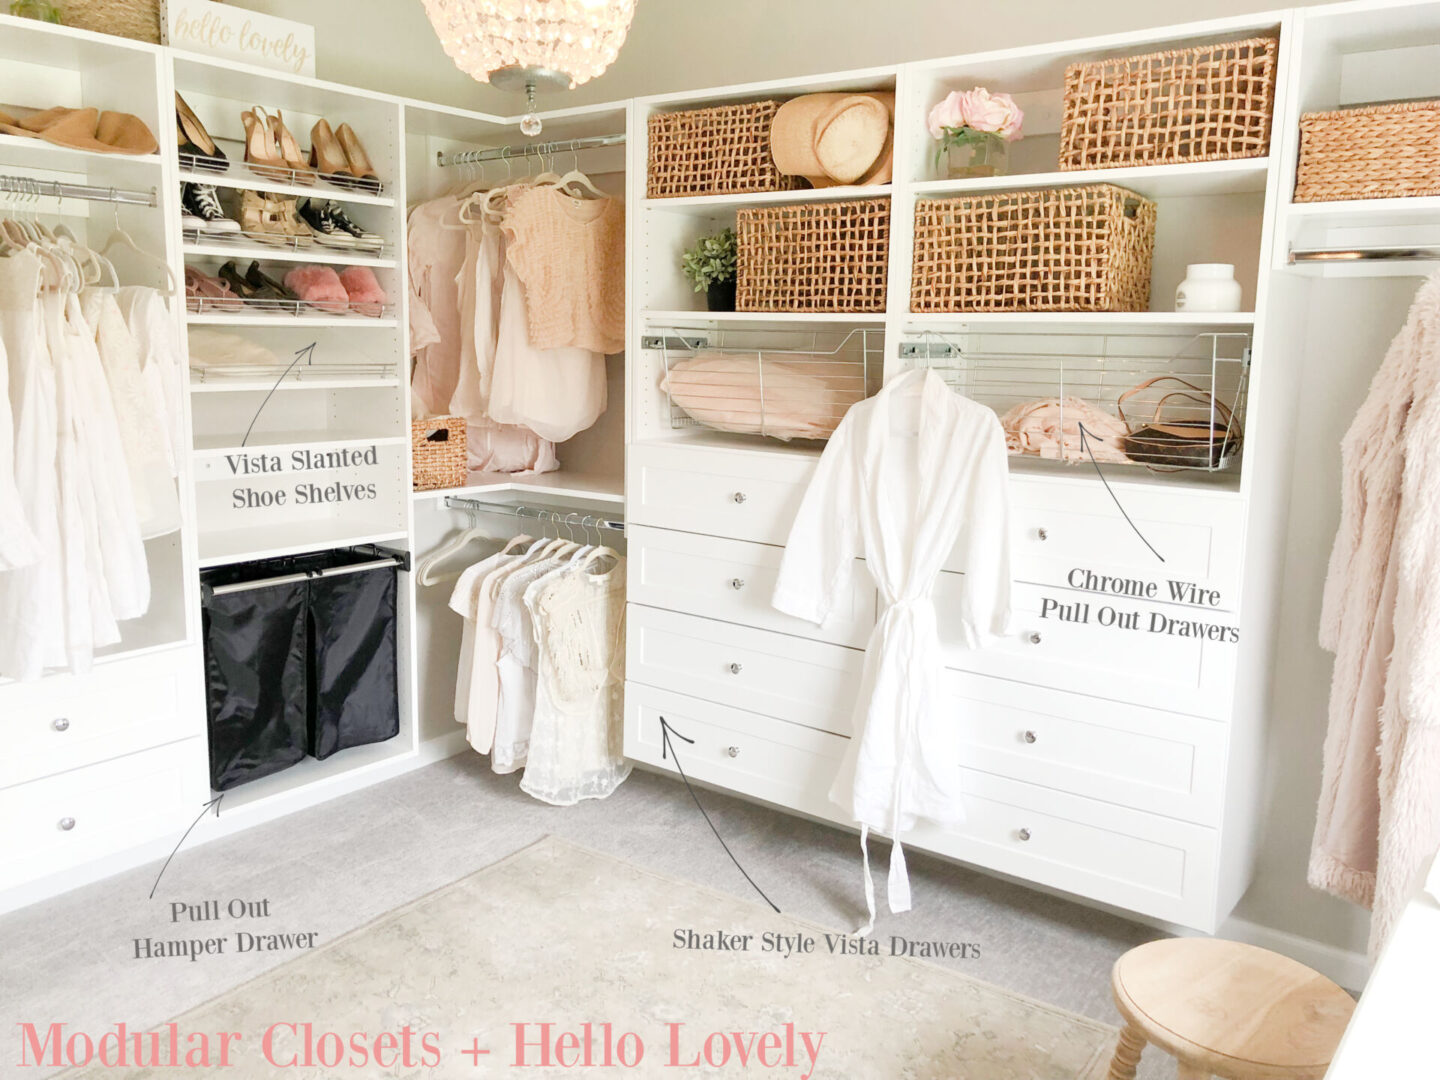 Love the closet accessories and modules from Modular Closets in my closet, office, dressing room "cloffice" - Hello Lovely Studio.